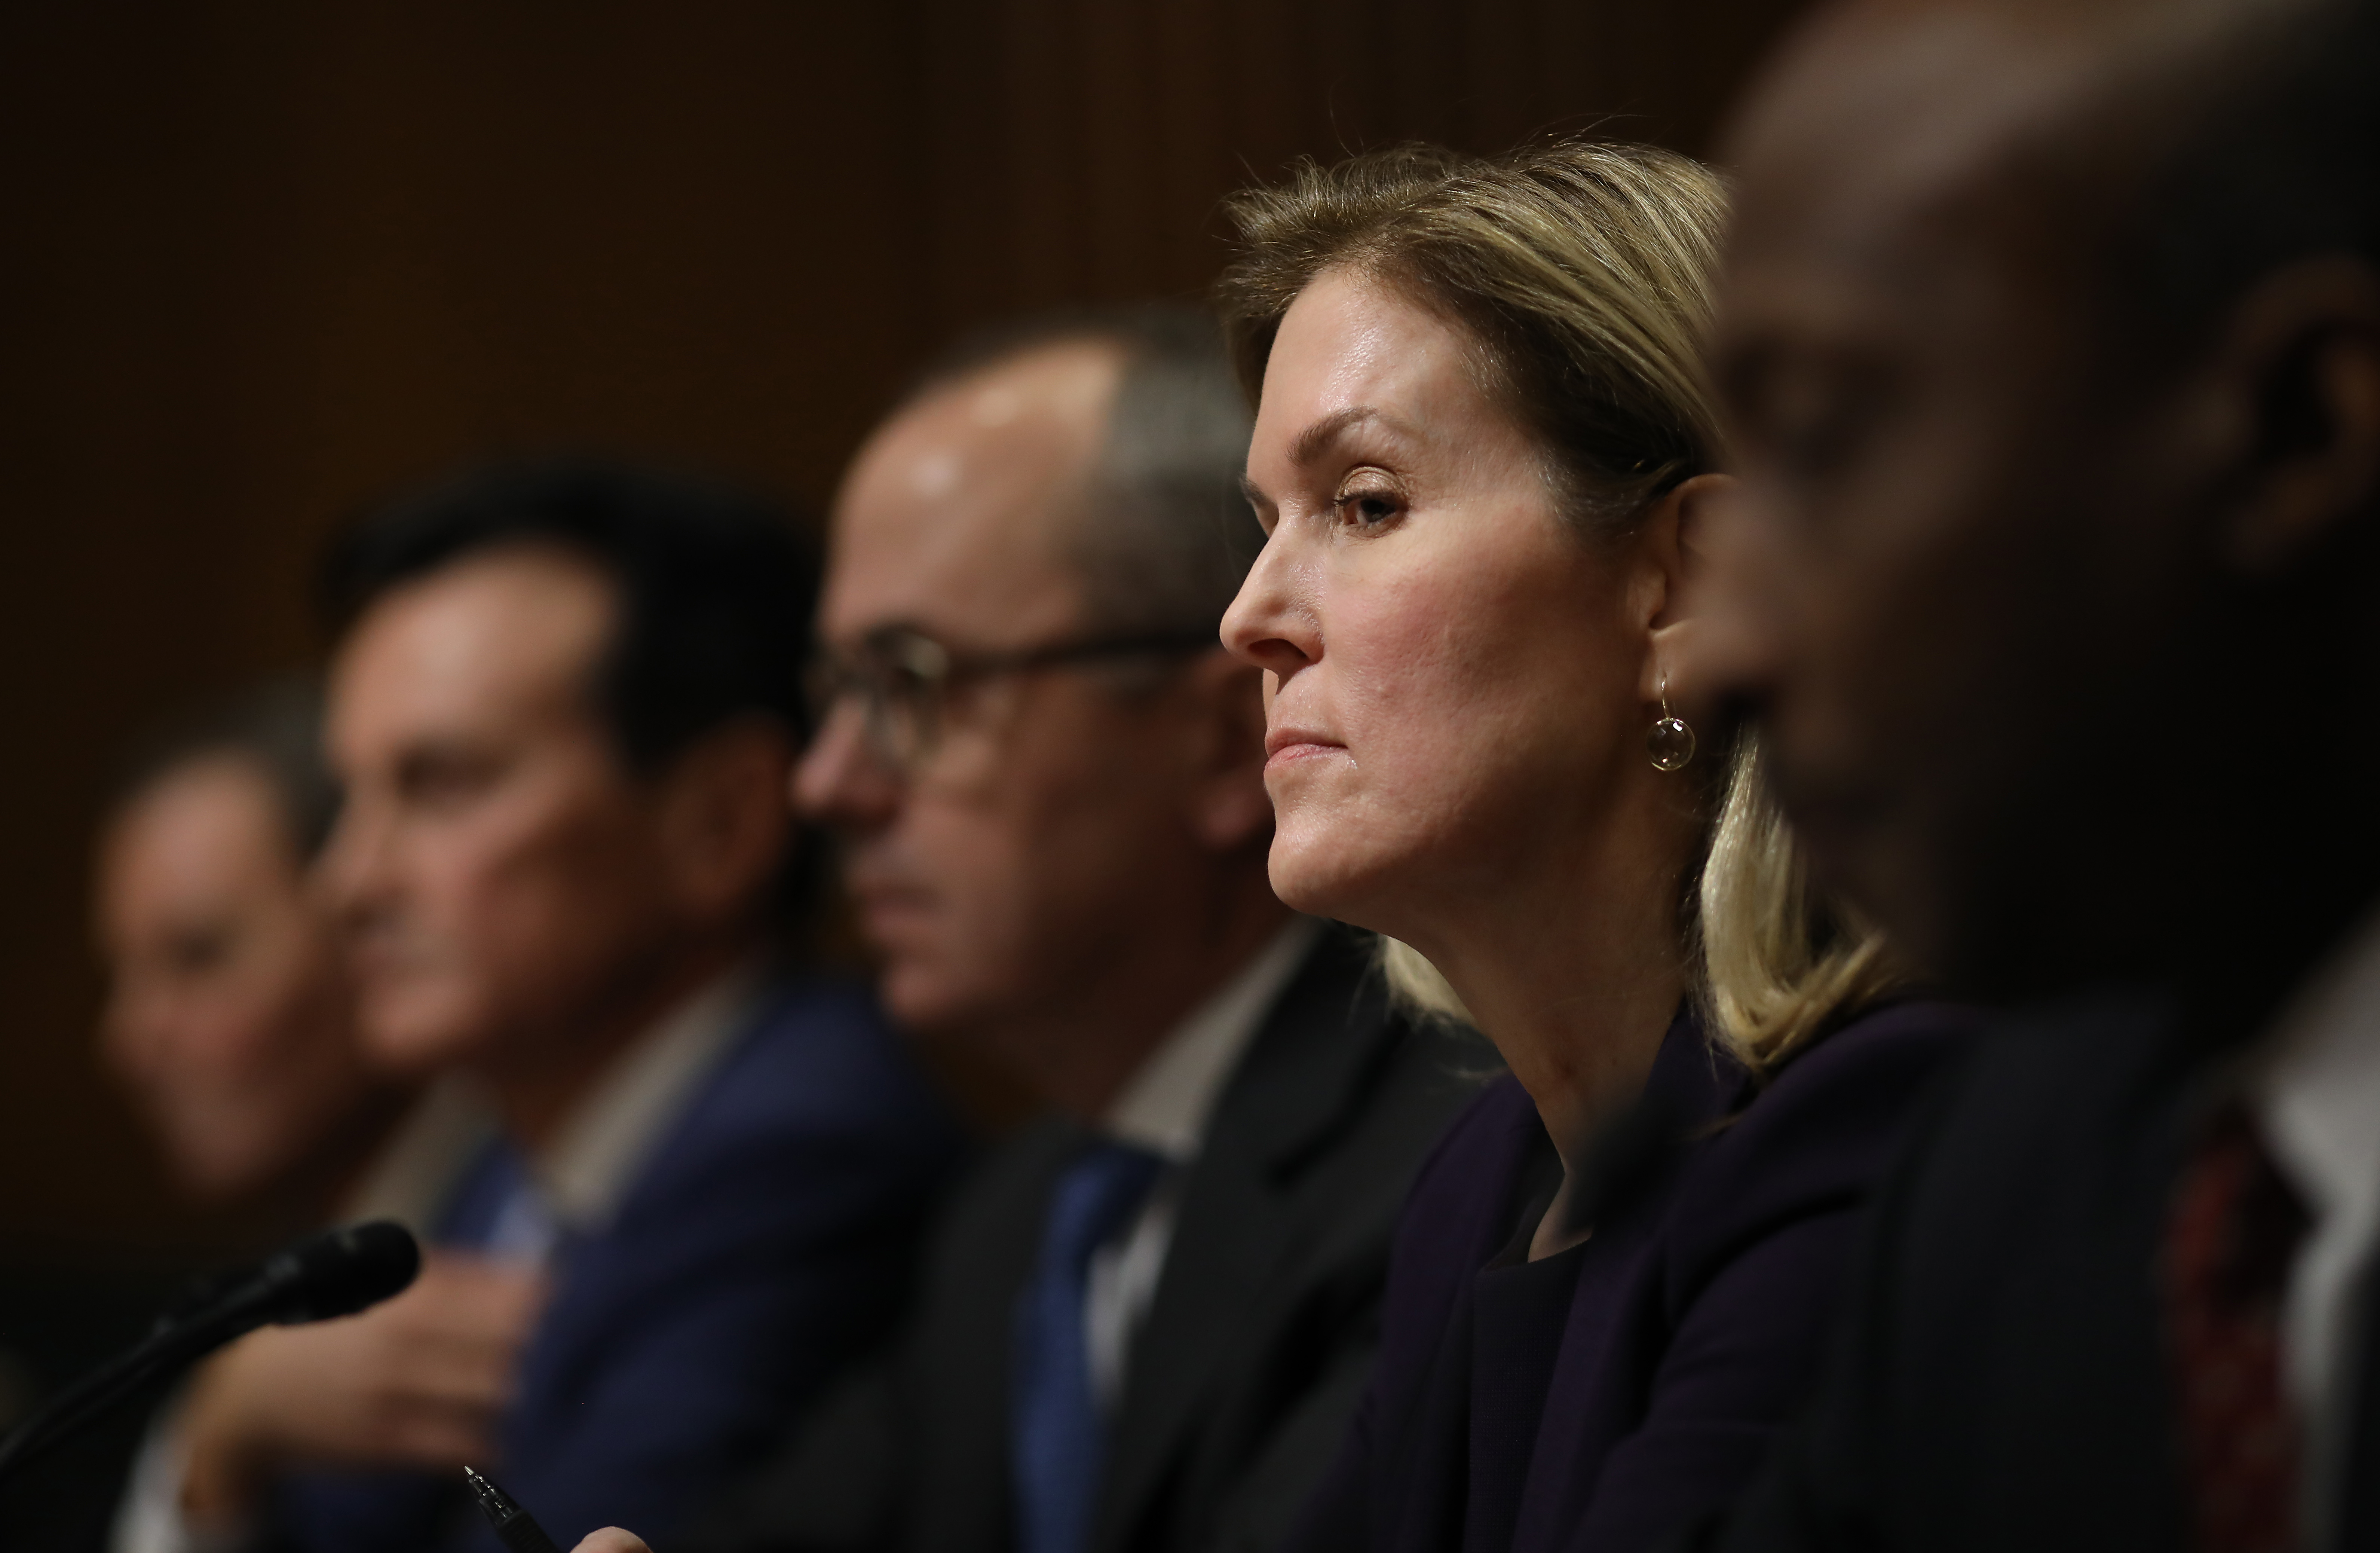 Jennifer Taubert, executive vice president and worldwide chairman of Janssen Pharmaceuticals, Johnson & Johnson (2nd R) testifies before the Senate Finance Committee on "Drug Pricing in America: A Prescription for Change, Part II" February 26, 2019 in Washington, DC. (Photo by Win McNamee/Getty Images)